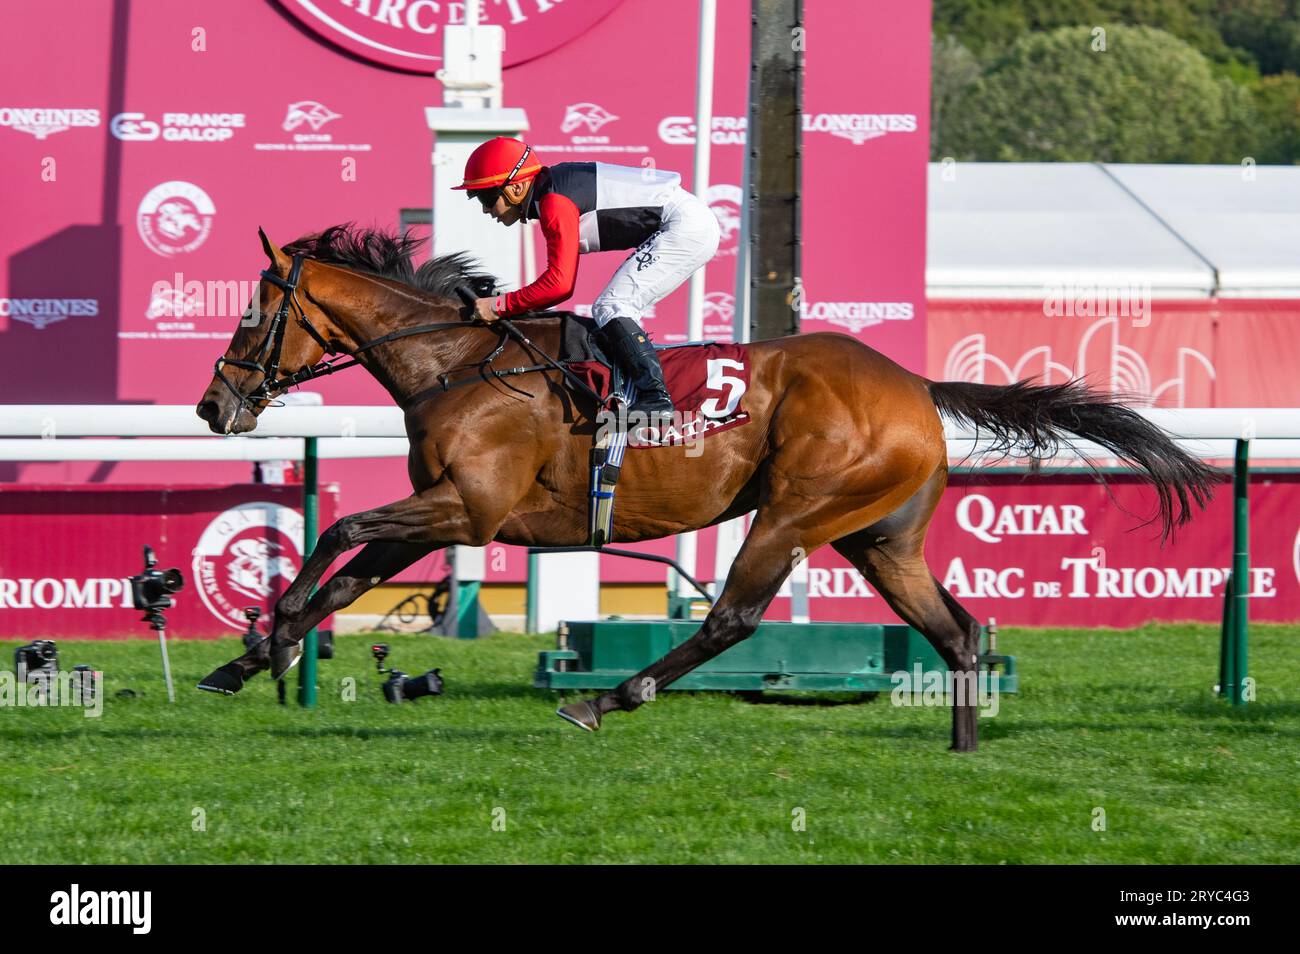 Paris, France, Saturday 30th September 2023. Poker Face and Aurelien Lemaitre win the Group 2 Prix Daniel Wildenstein for trainer Simon & Ed Crisford and owner Mr Edware Ware. Credit JTW Equine Images / Alamy Live News Stock Photo